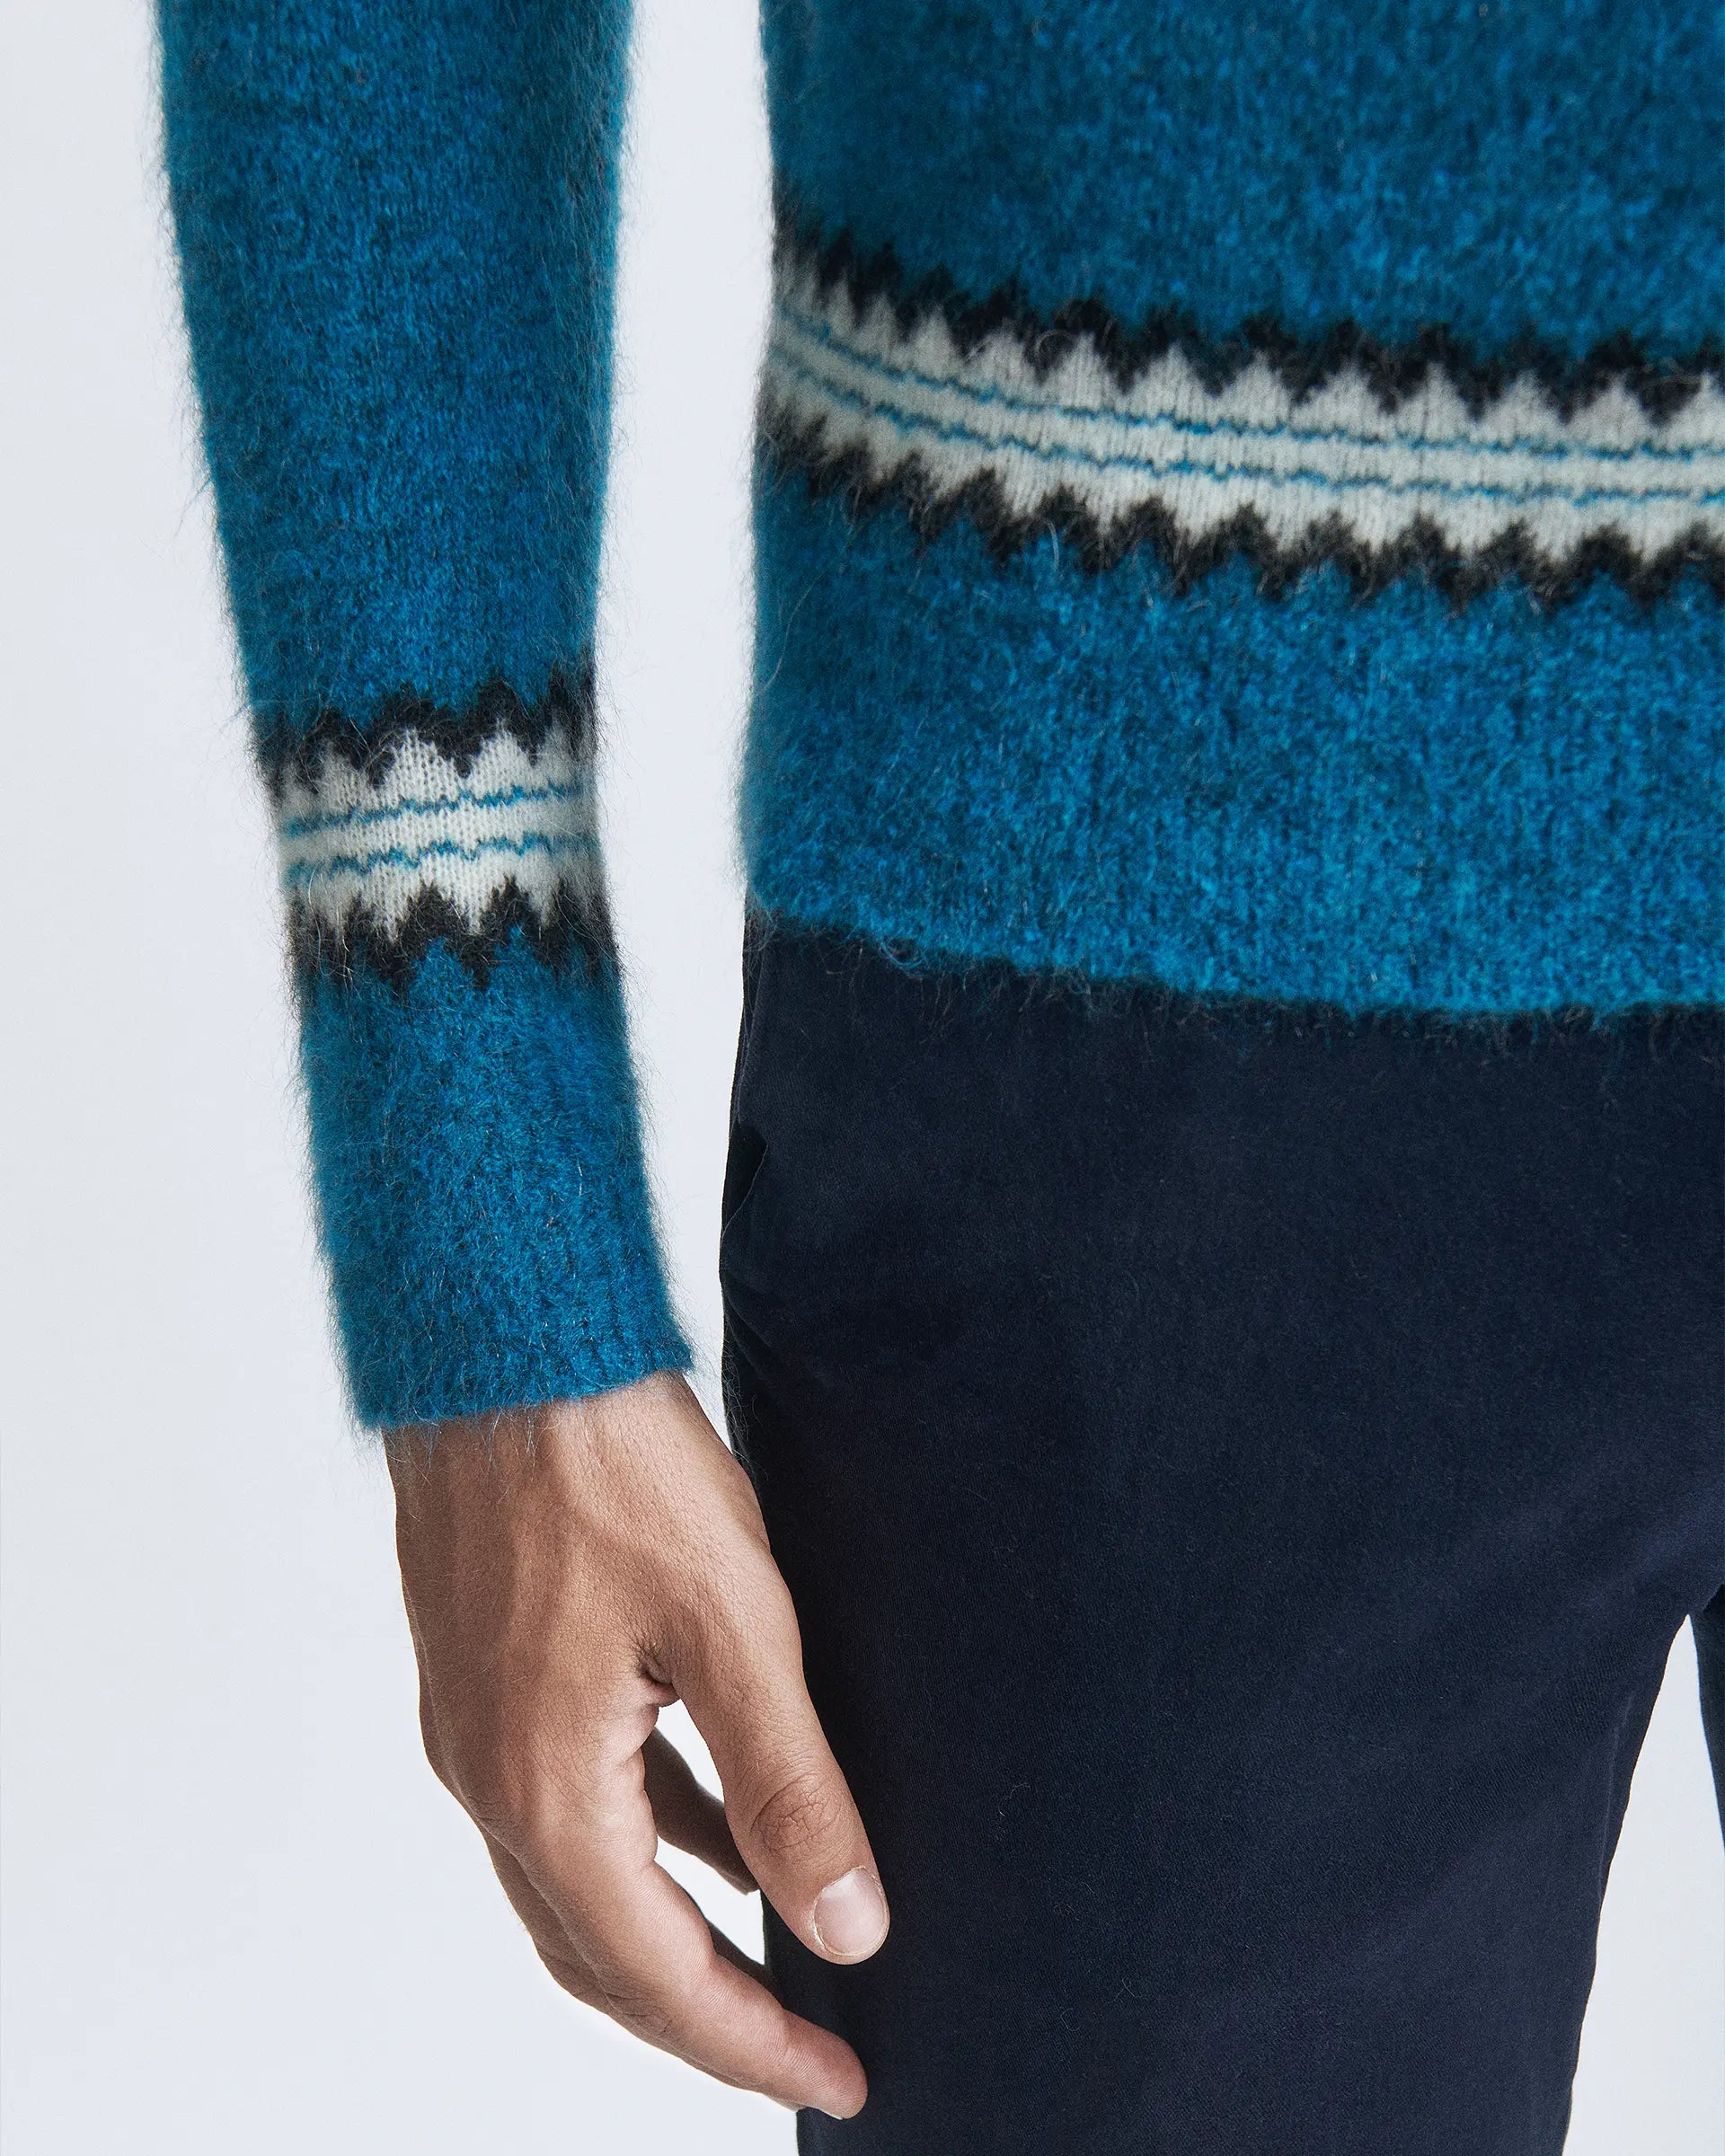 Blue patterned crewneck in wool and mohair, gauge 7